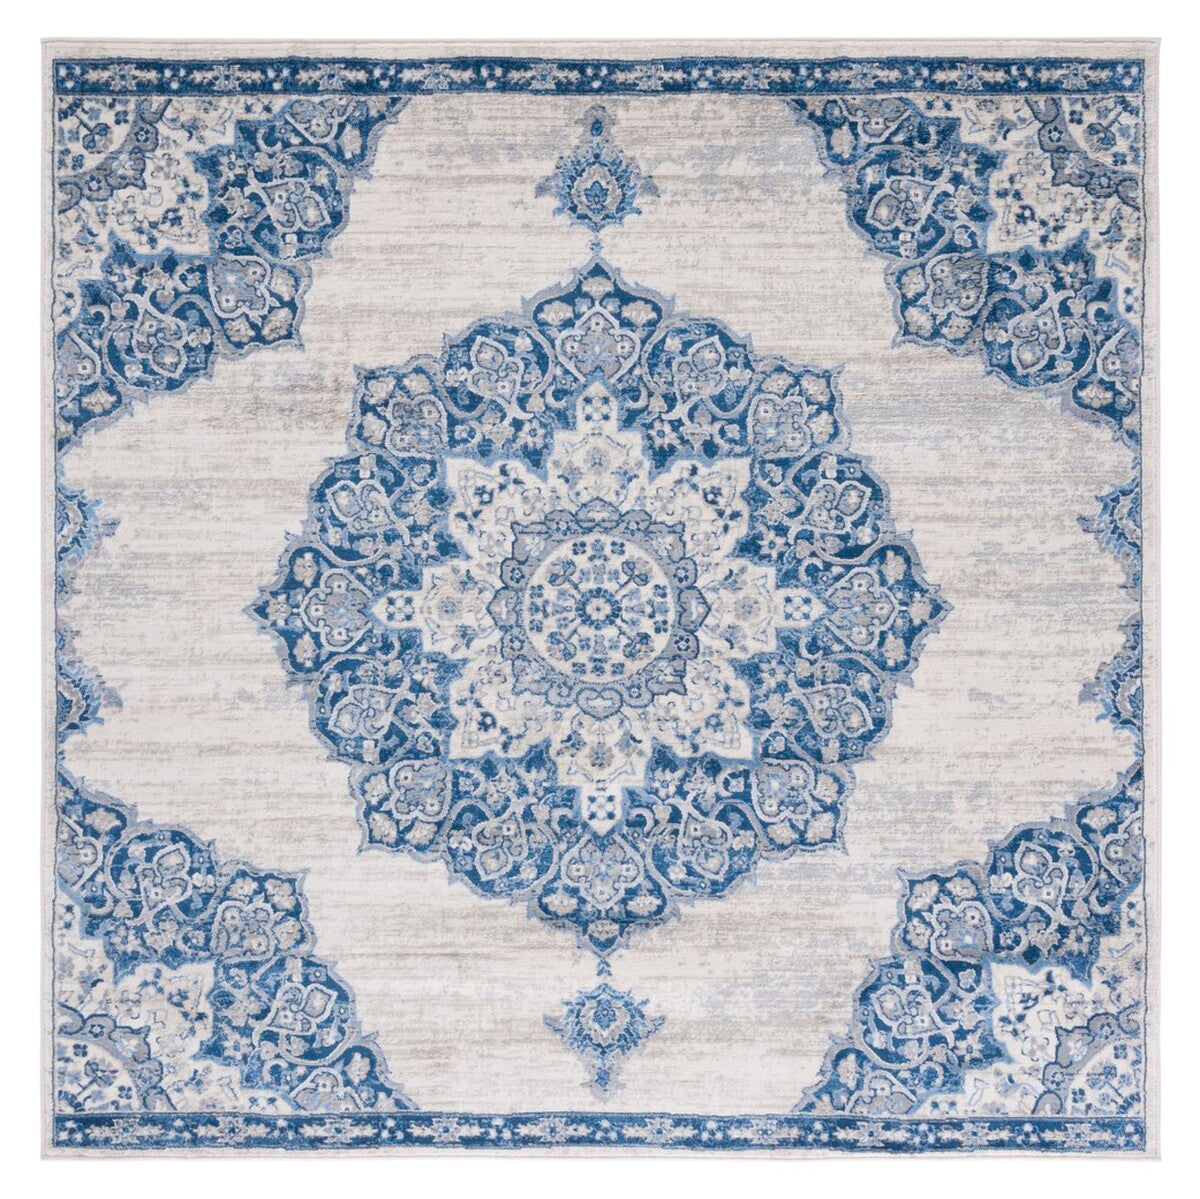 Safavieh Brentwood Bnt802D Ivory/Navy Area Rug